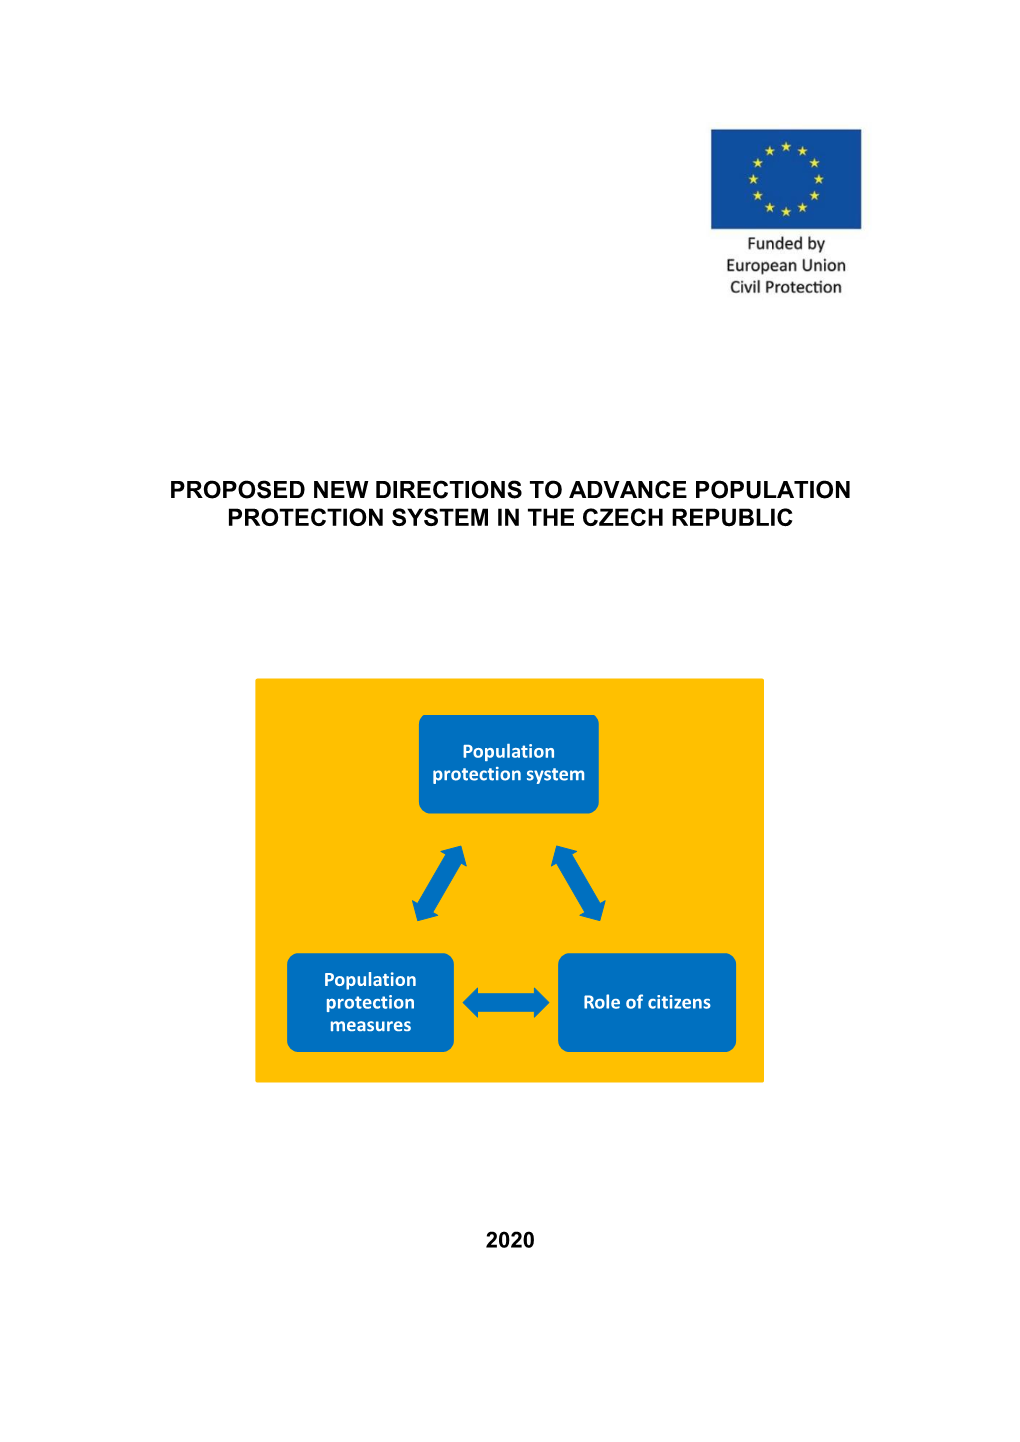 Proposed New Directions to Advance Population Protection System in the Czech Republic